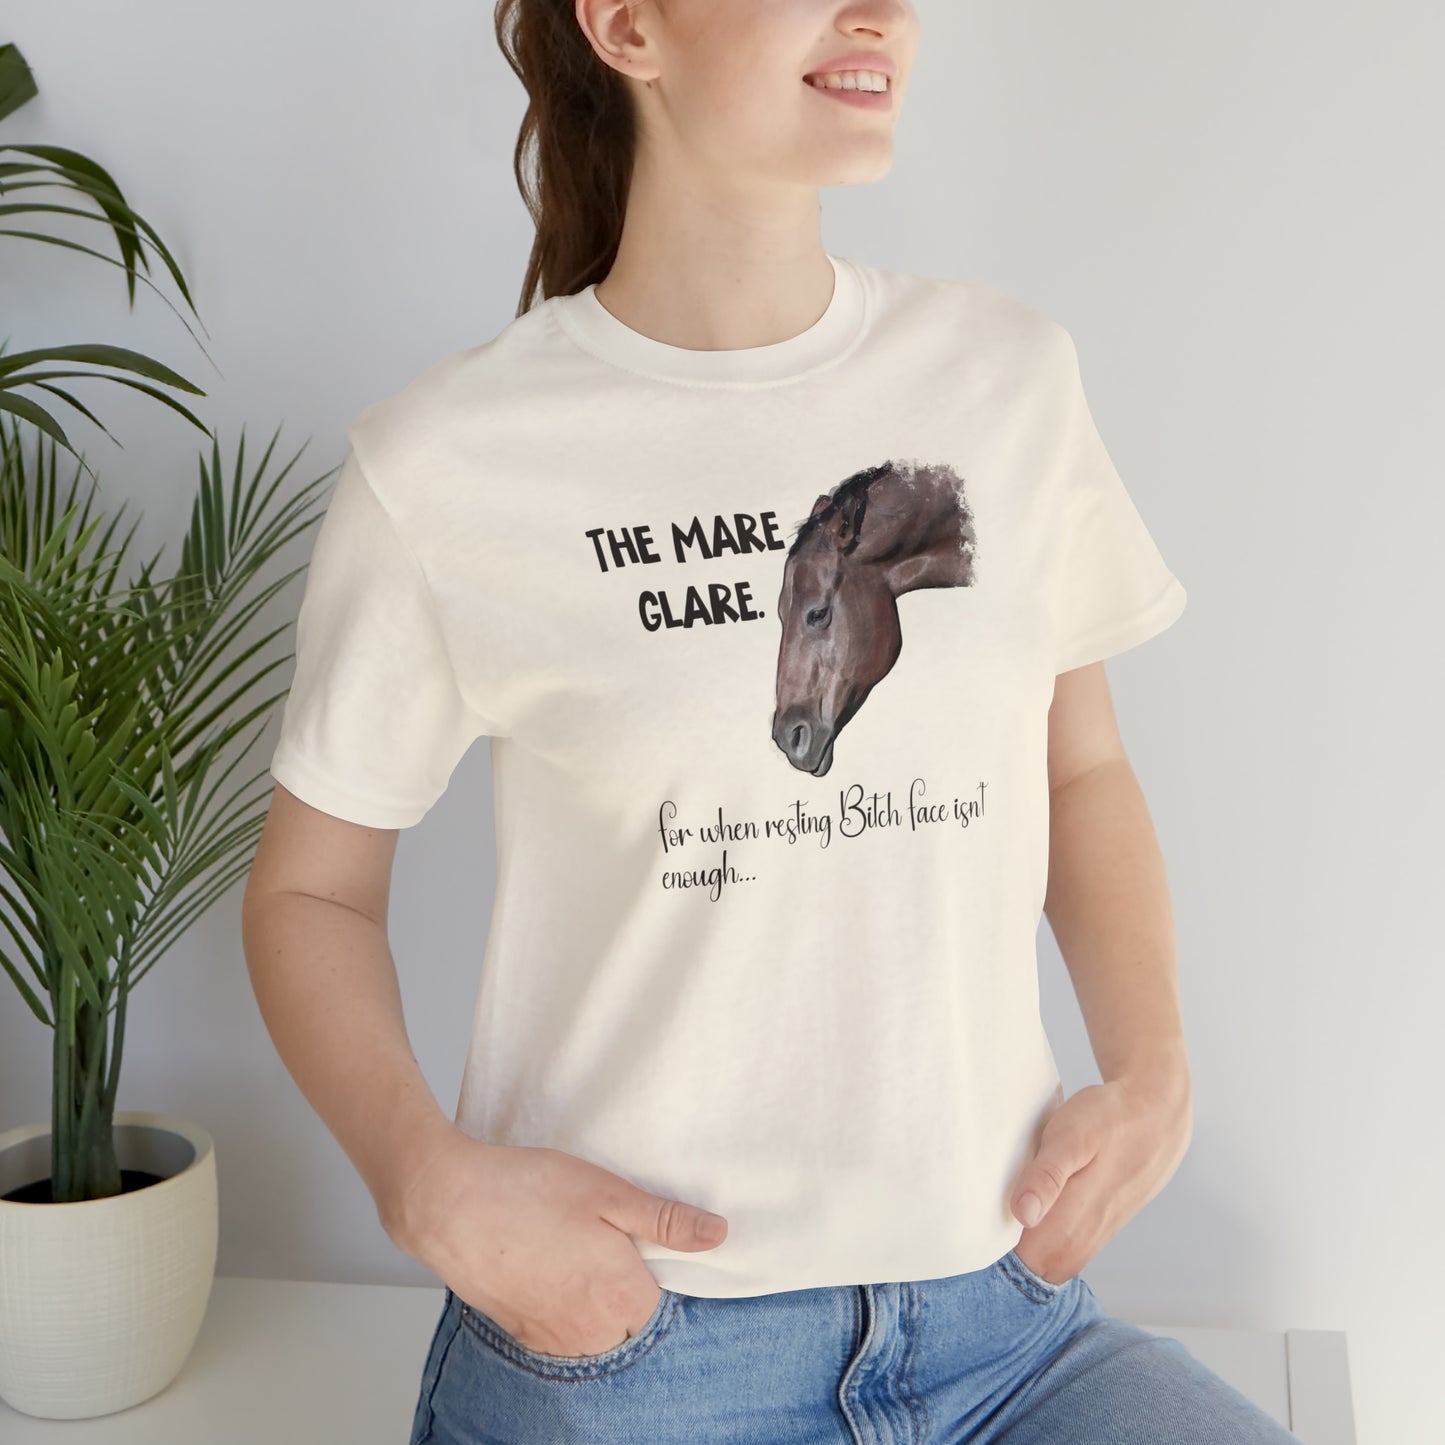 Silly Horse T-shirt: Funny, Angry Horse T-shirt for Horse Lovers